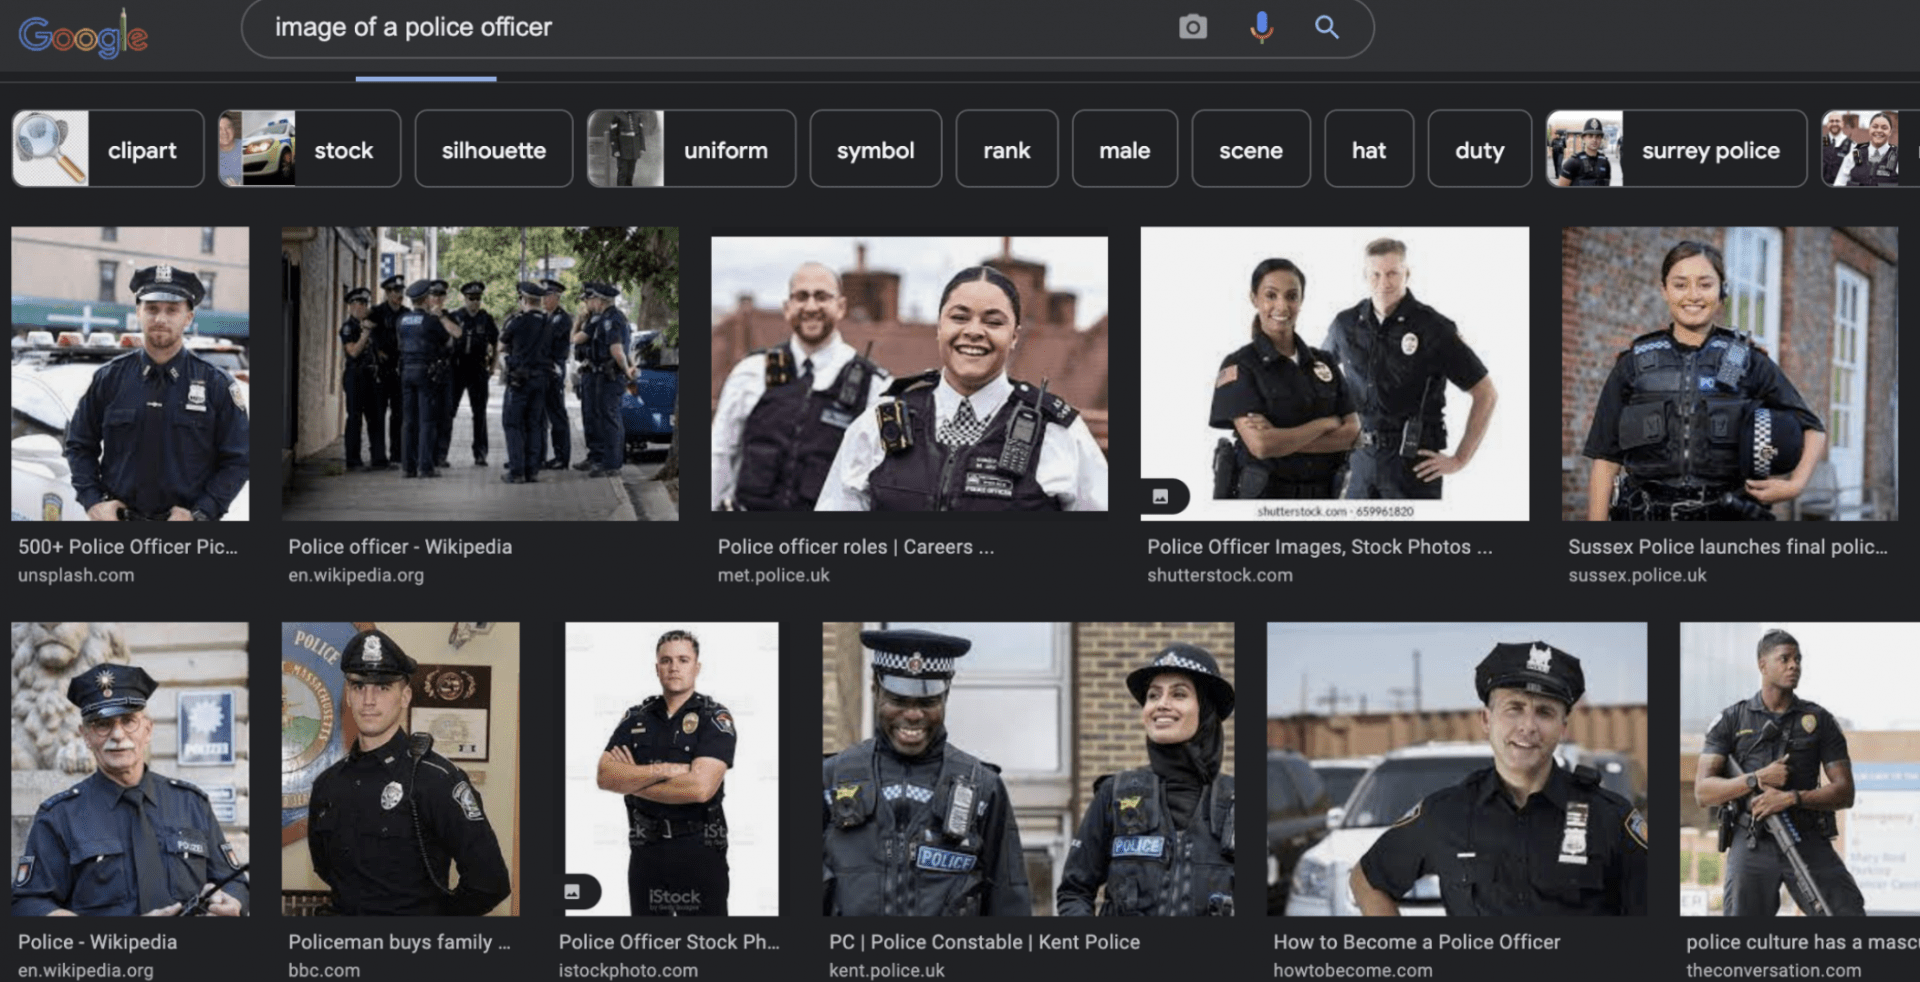 Screenshot of a police officer image search